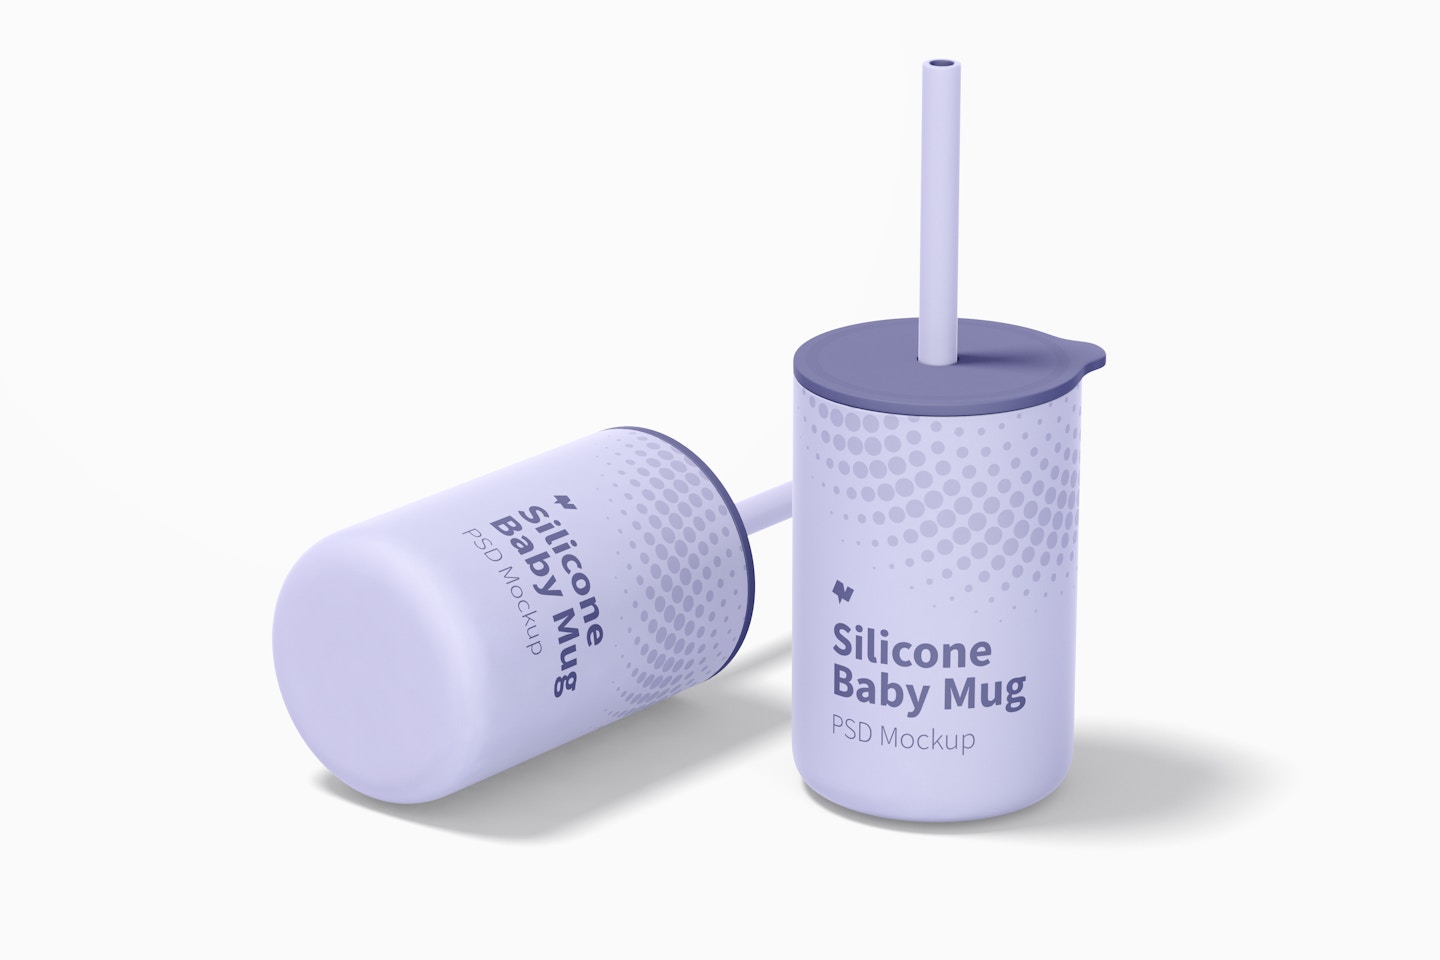 Silicone Baby Mugs with Lid Mockup, Perspective